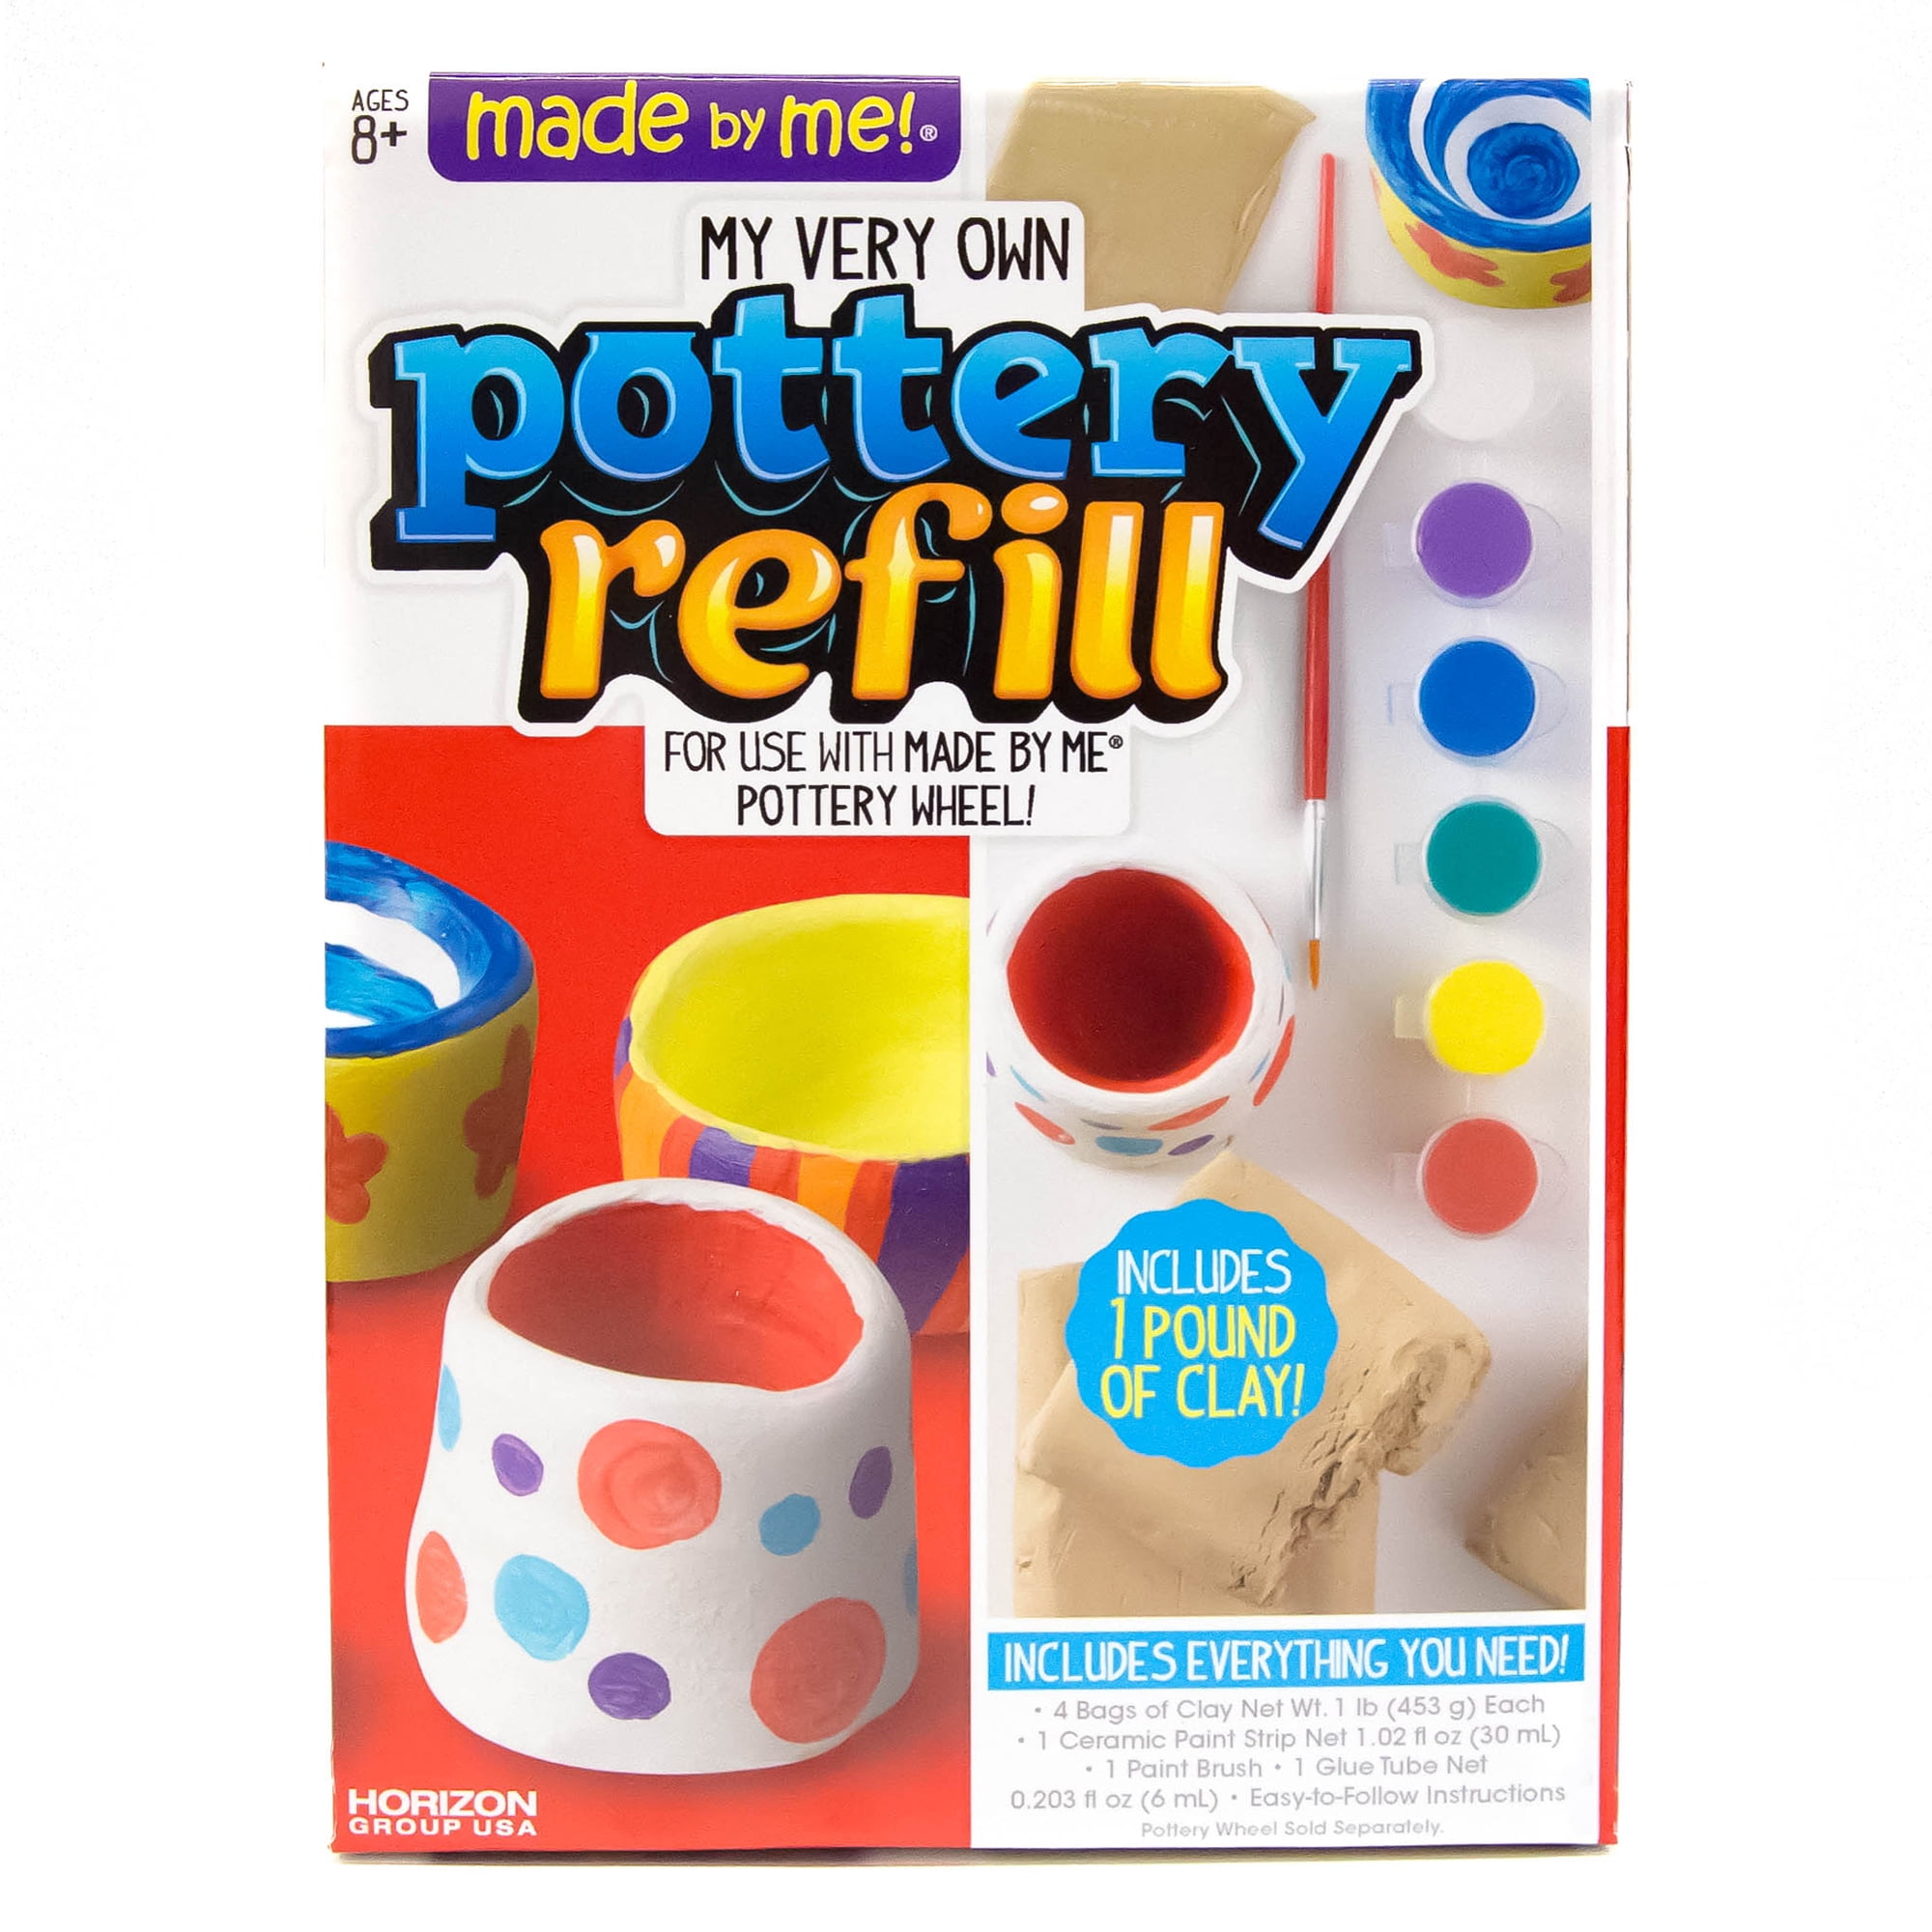 Made By Me Refill Pottery Wheel, 1 Each